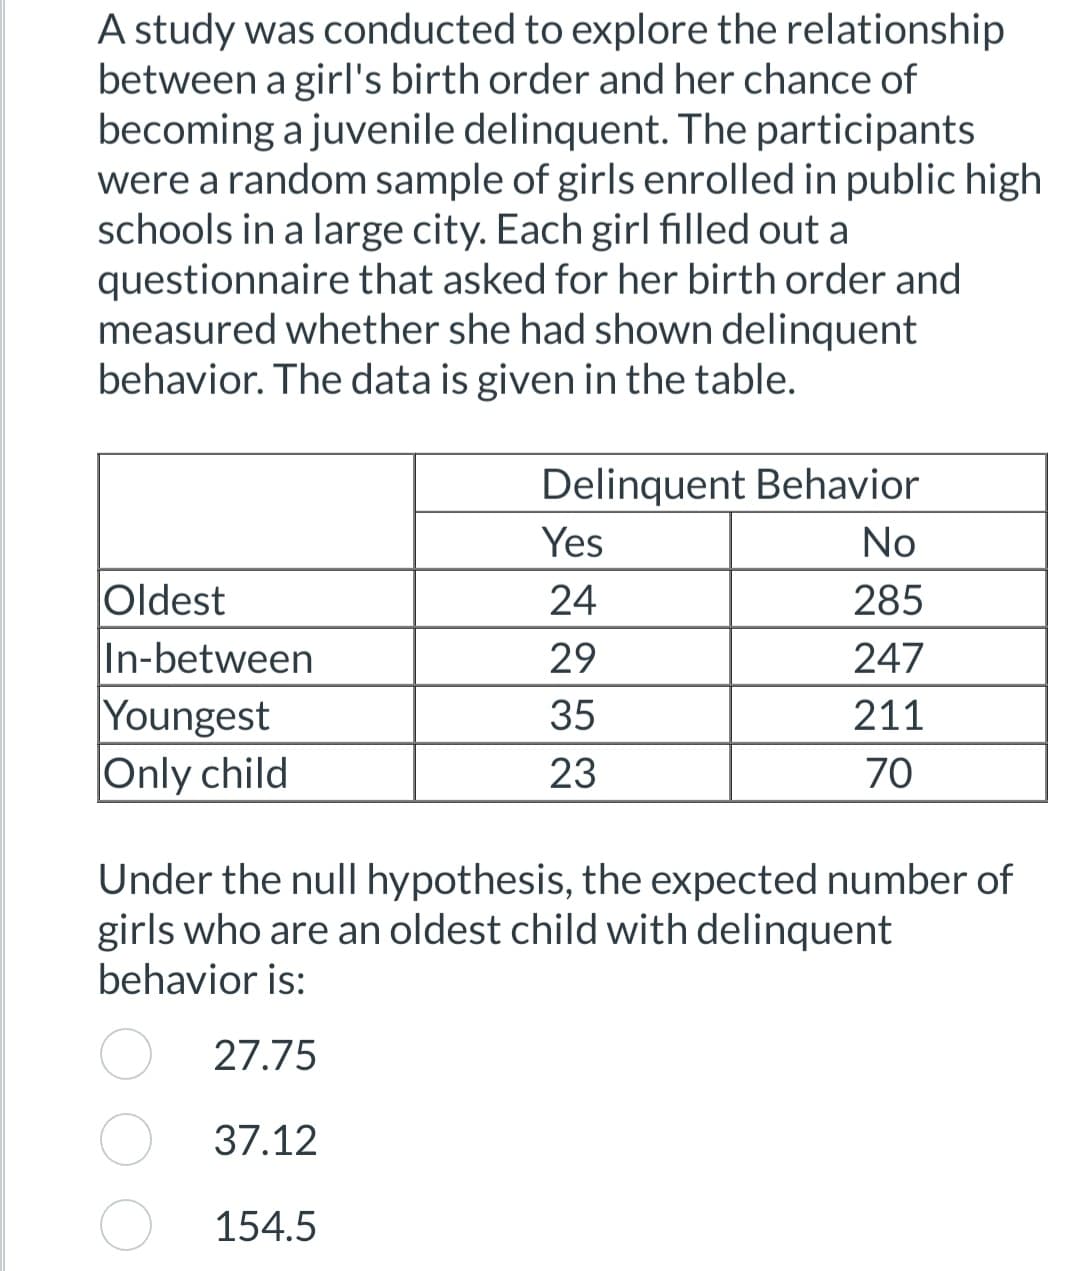 A study was conducted to explore the relationship
between a girl's birth order and her chance of
becoming a juvenile delinquent. The participants
were a random sample of girls enrolled in public high
schools in a large city. Each girl filled out a
questionnaire that asked for her birth order and
measured whether she had shown delinquent
behavior. The data is given in the table.
Oldest
In-between
Youngest
Only child
Delinquent Behavior
No
285
247
211
70
Yes
24
29
35
23
Under the null hypothesis, the expected number of
girls who are an oldest child with delinquent
behavior is:
27.75
37.12
154.5